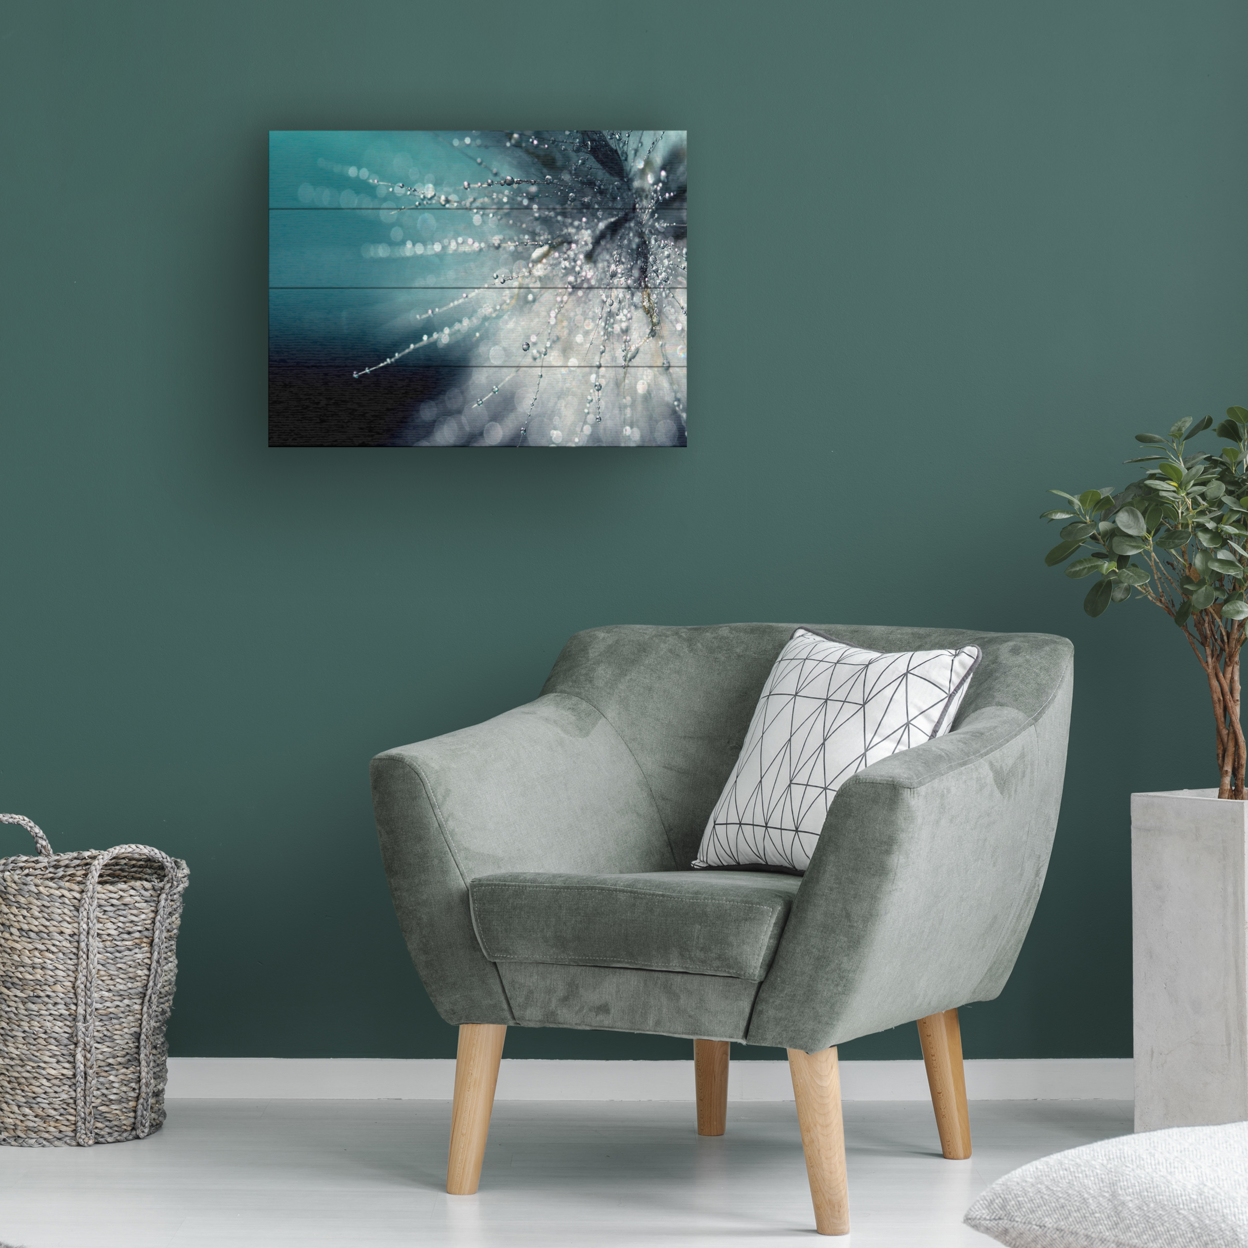 Wall Art 12 X 16 Inches Titled Morning Sonata Ready To Hang Printed On Wooden Planks